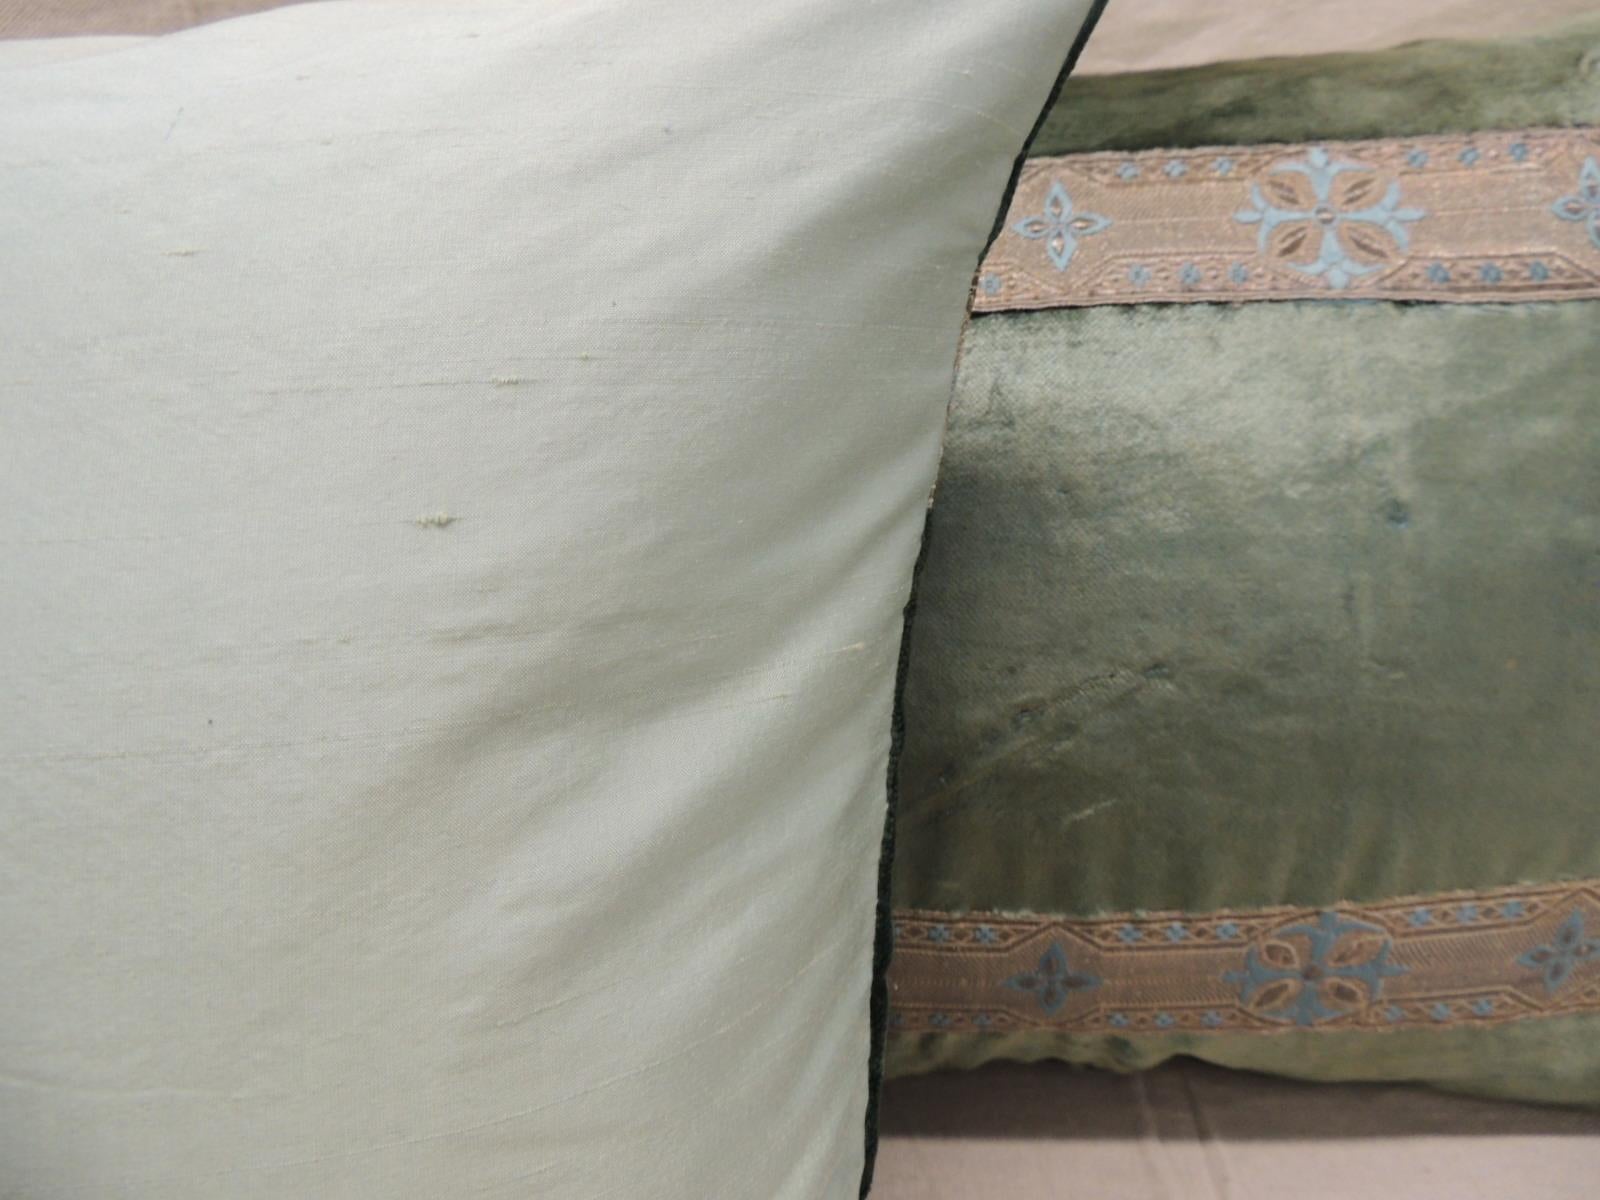 19th Century Pair of Antique Crushed Velvet Green and Silver Bolsters Decorative Pillows